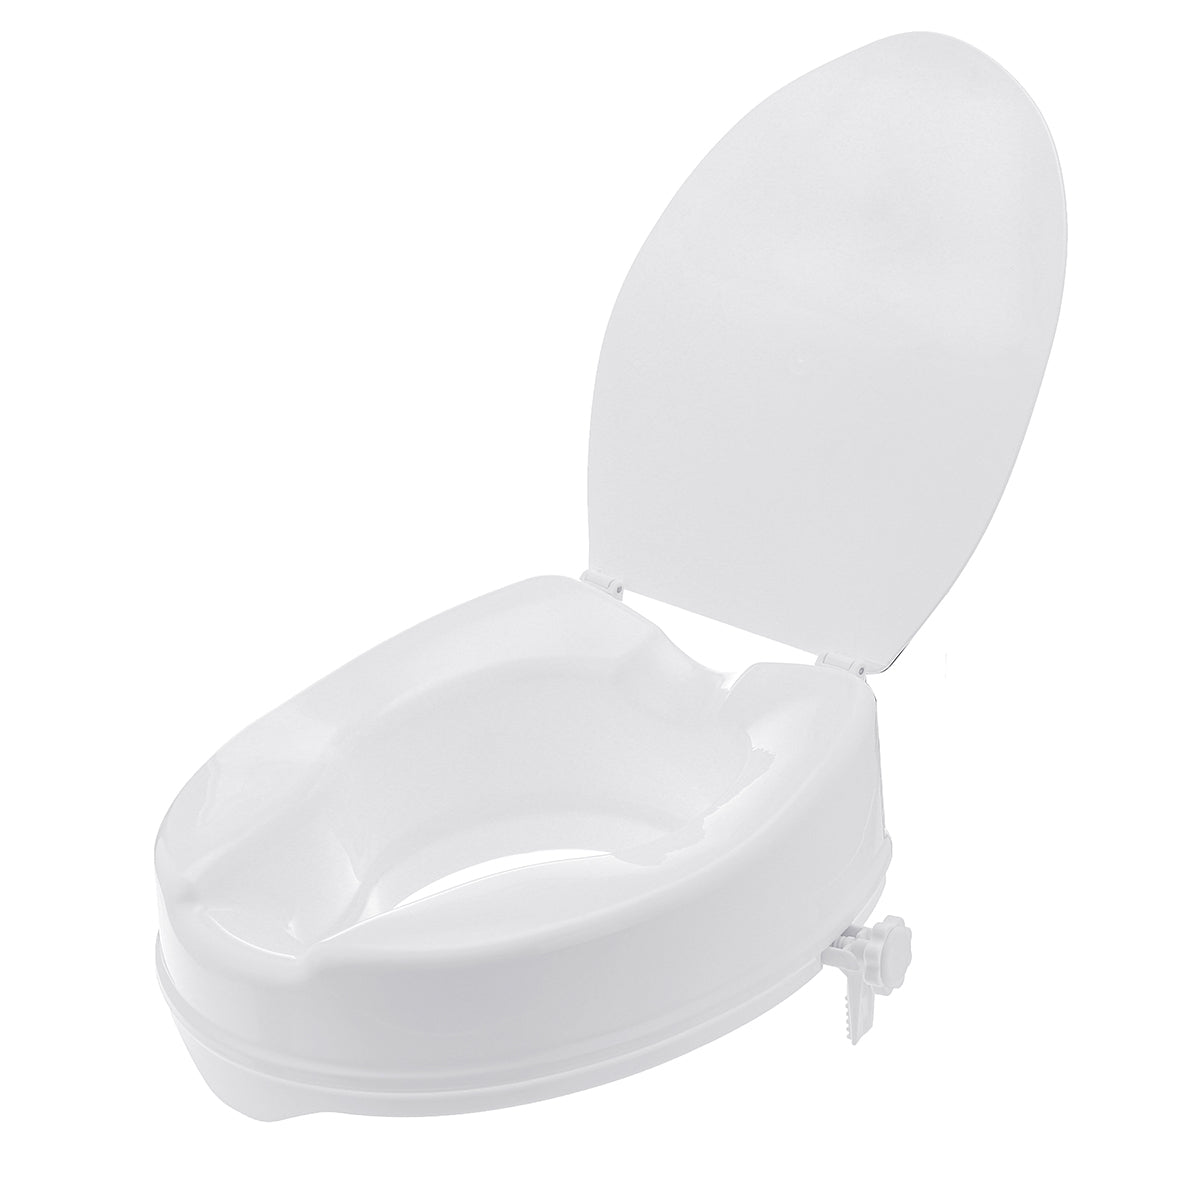 Portable Patients Elderly Toilet Seat Riser Non-slip Elevating White Toilet Seat with Lid With adjustable Sprial